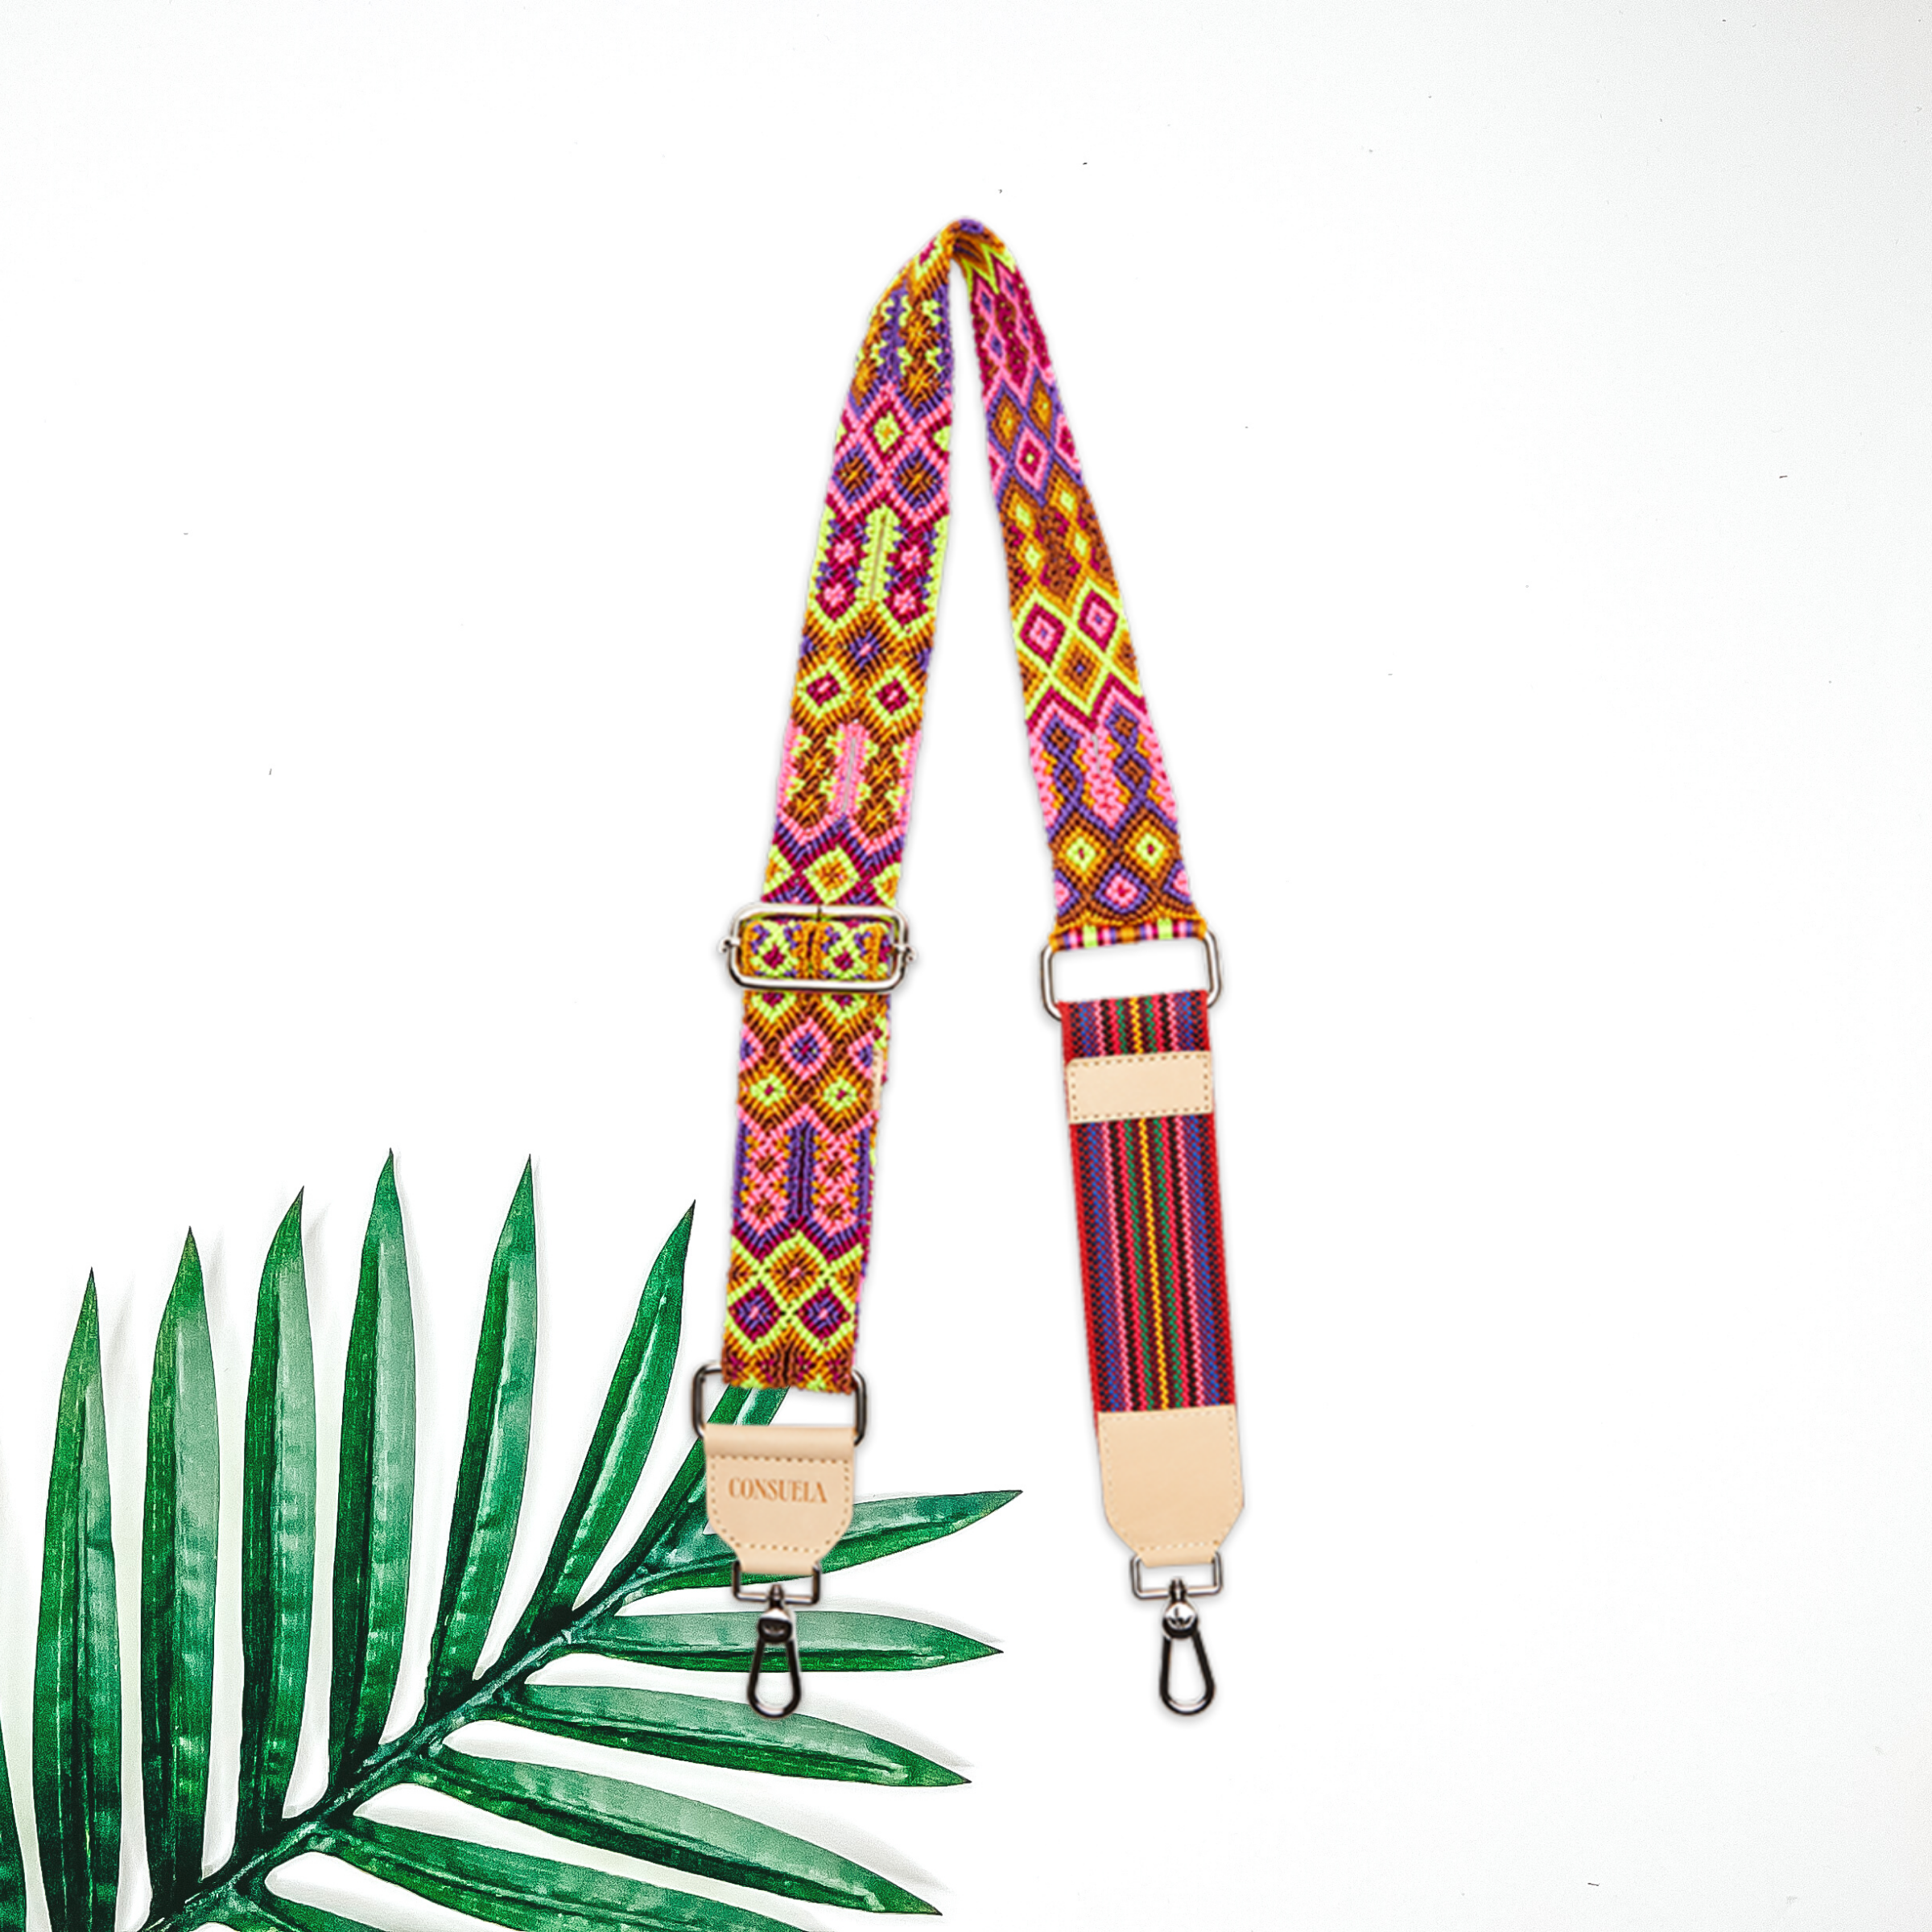 Centered in the picture is a multi colored purse strap. A palm leaf is to the left of the strap and the background is white. 